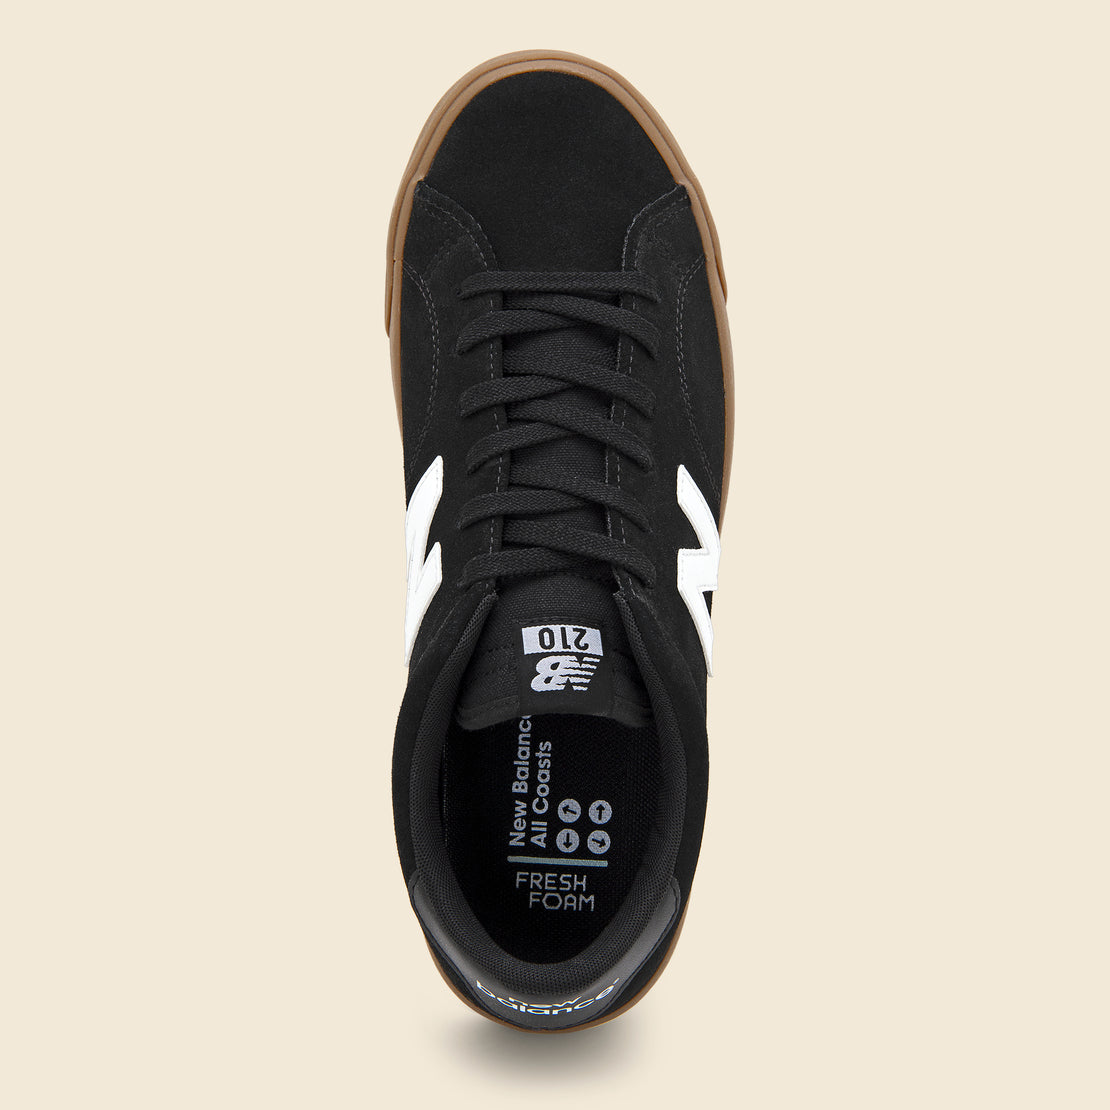 AM210 Sneaker - Black/Gum - New Balance - STAG Provisions - Shoes - Athletic